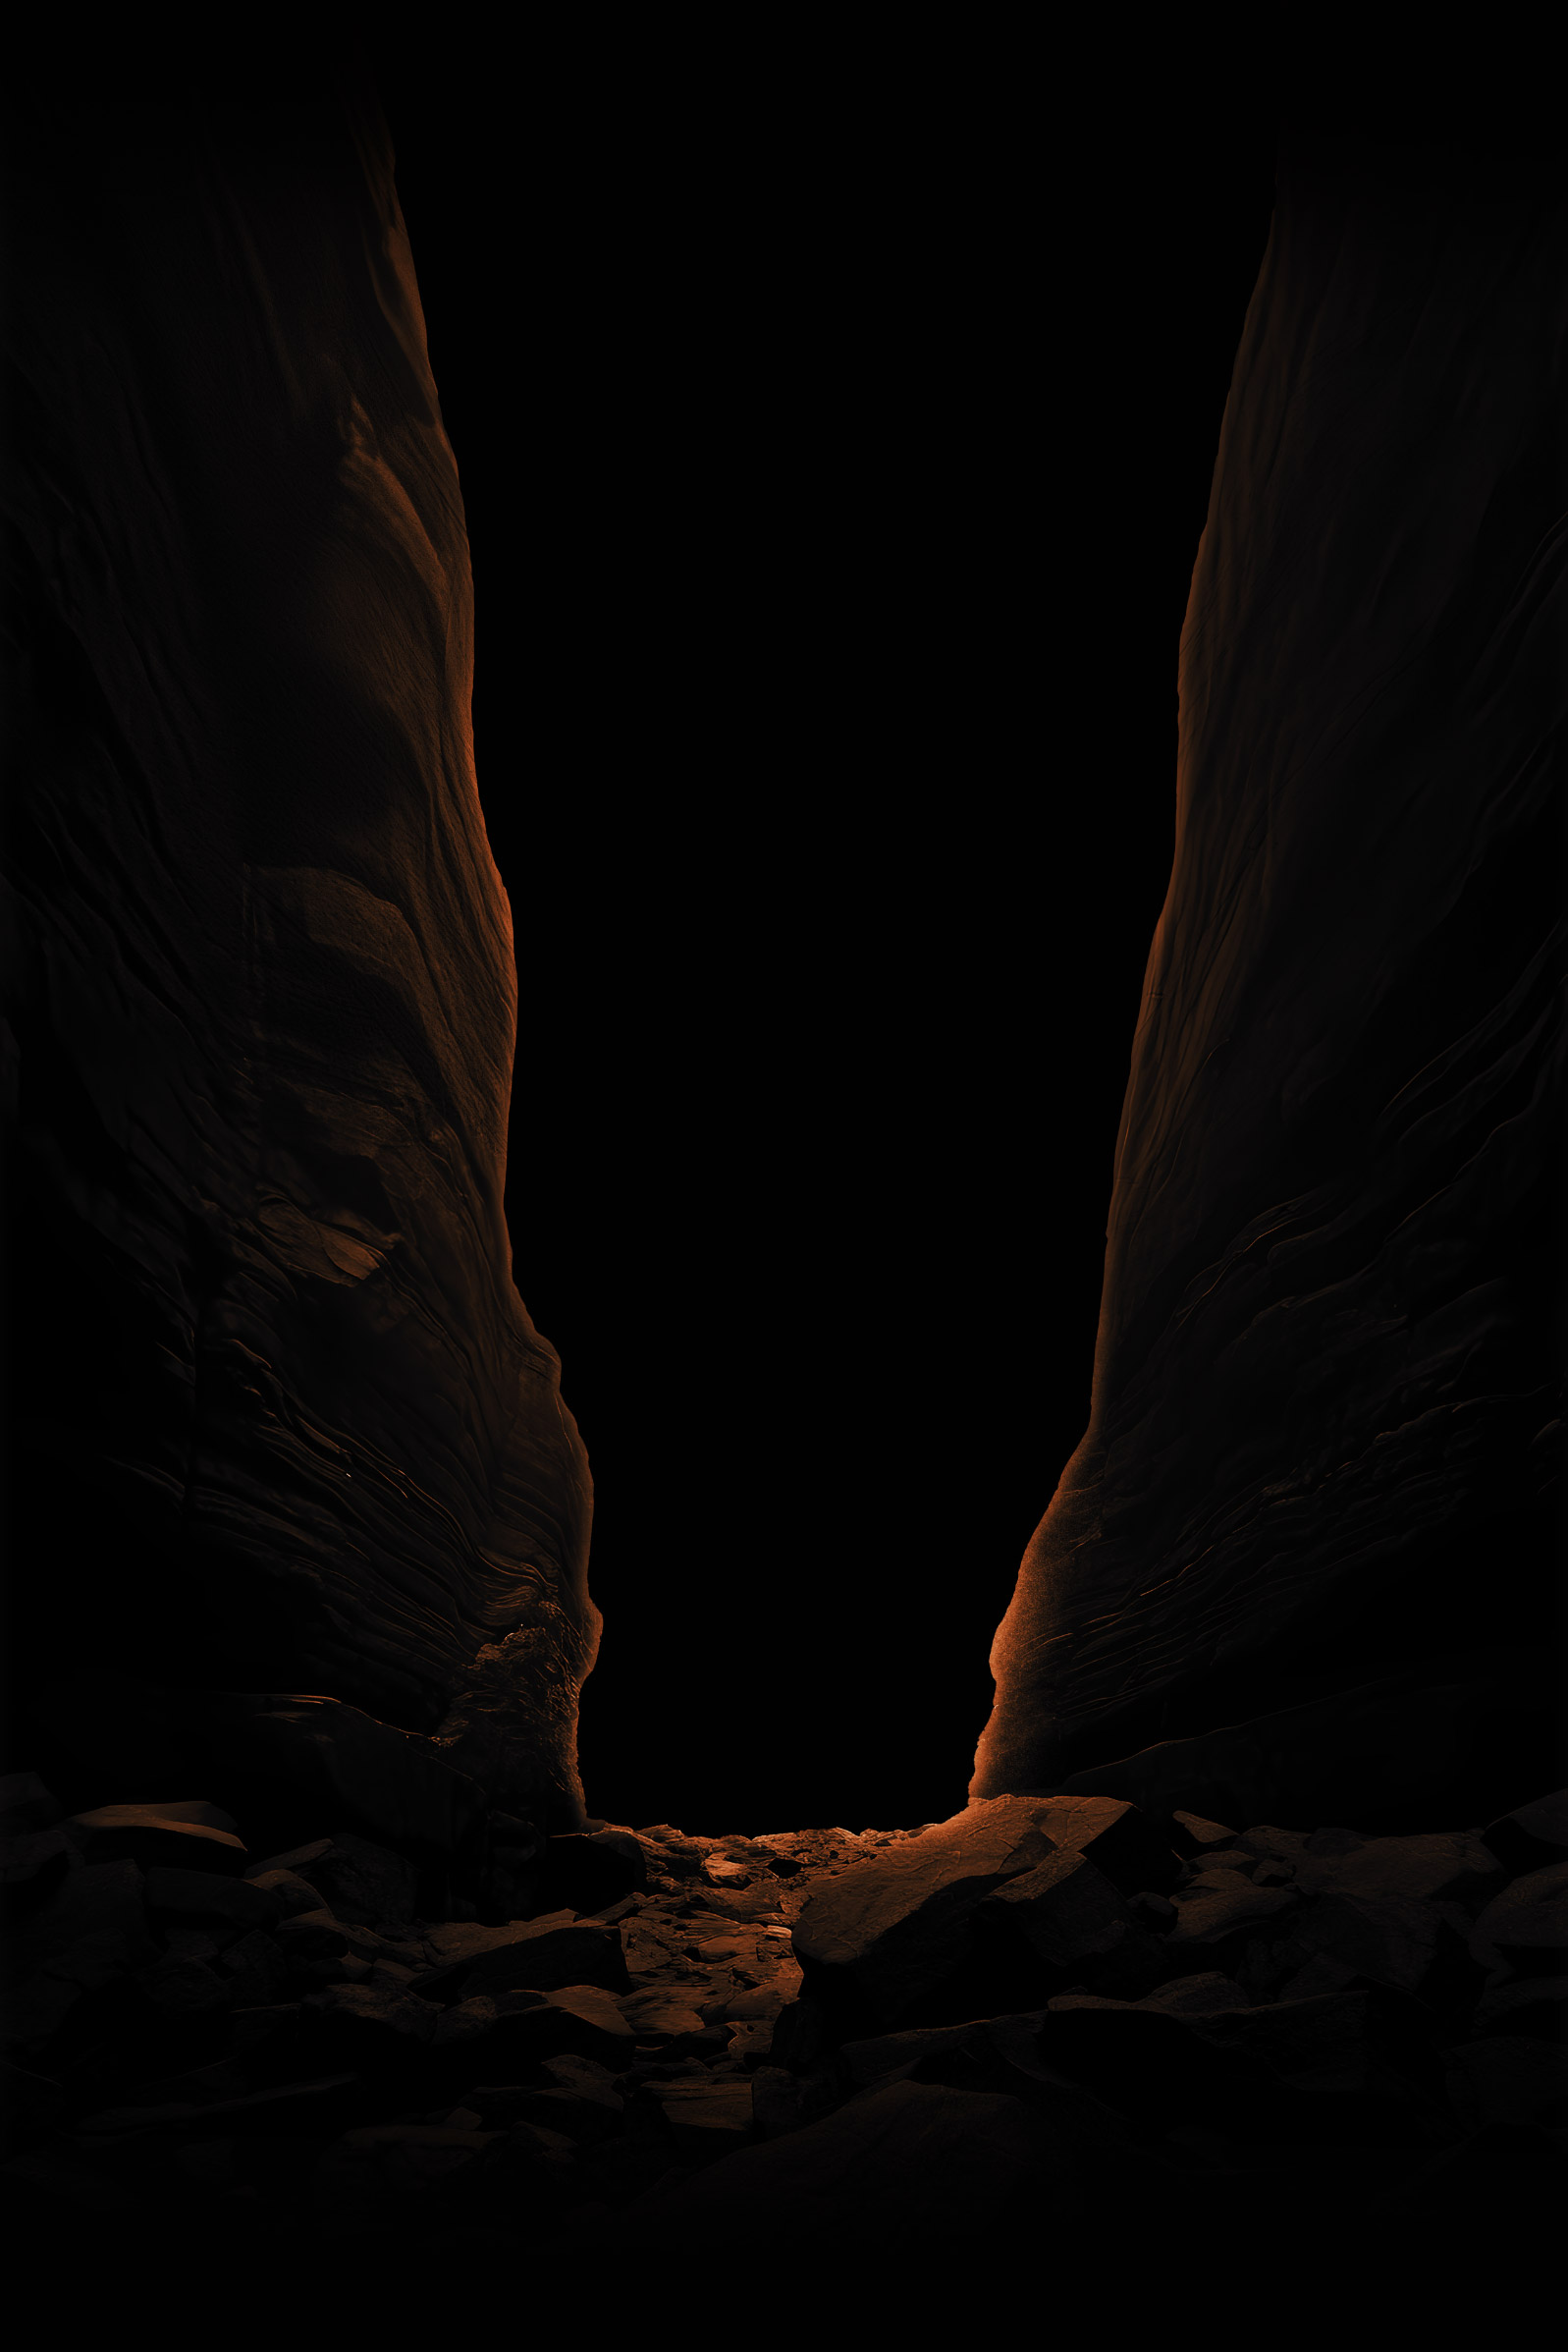 Canyon at night background